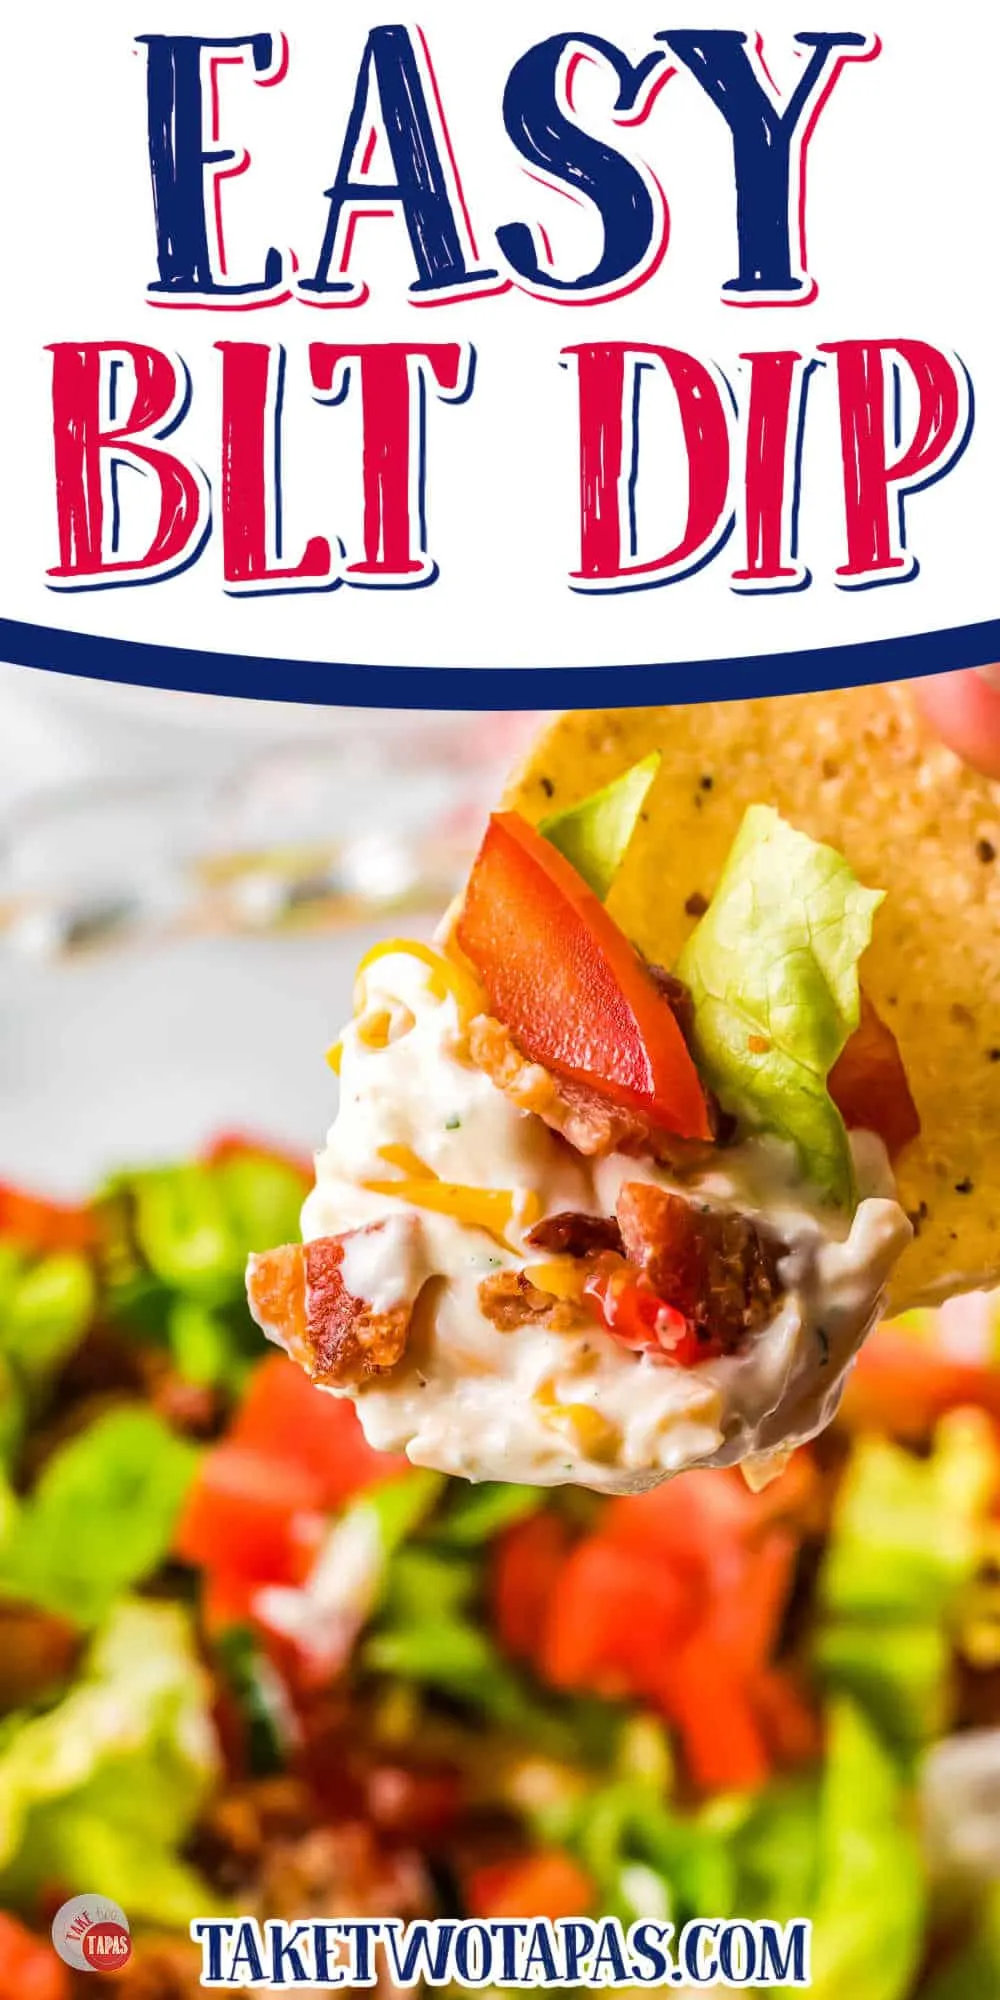 scoop of dip with text "Easy BLT Dip"